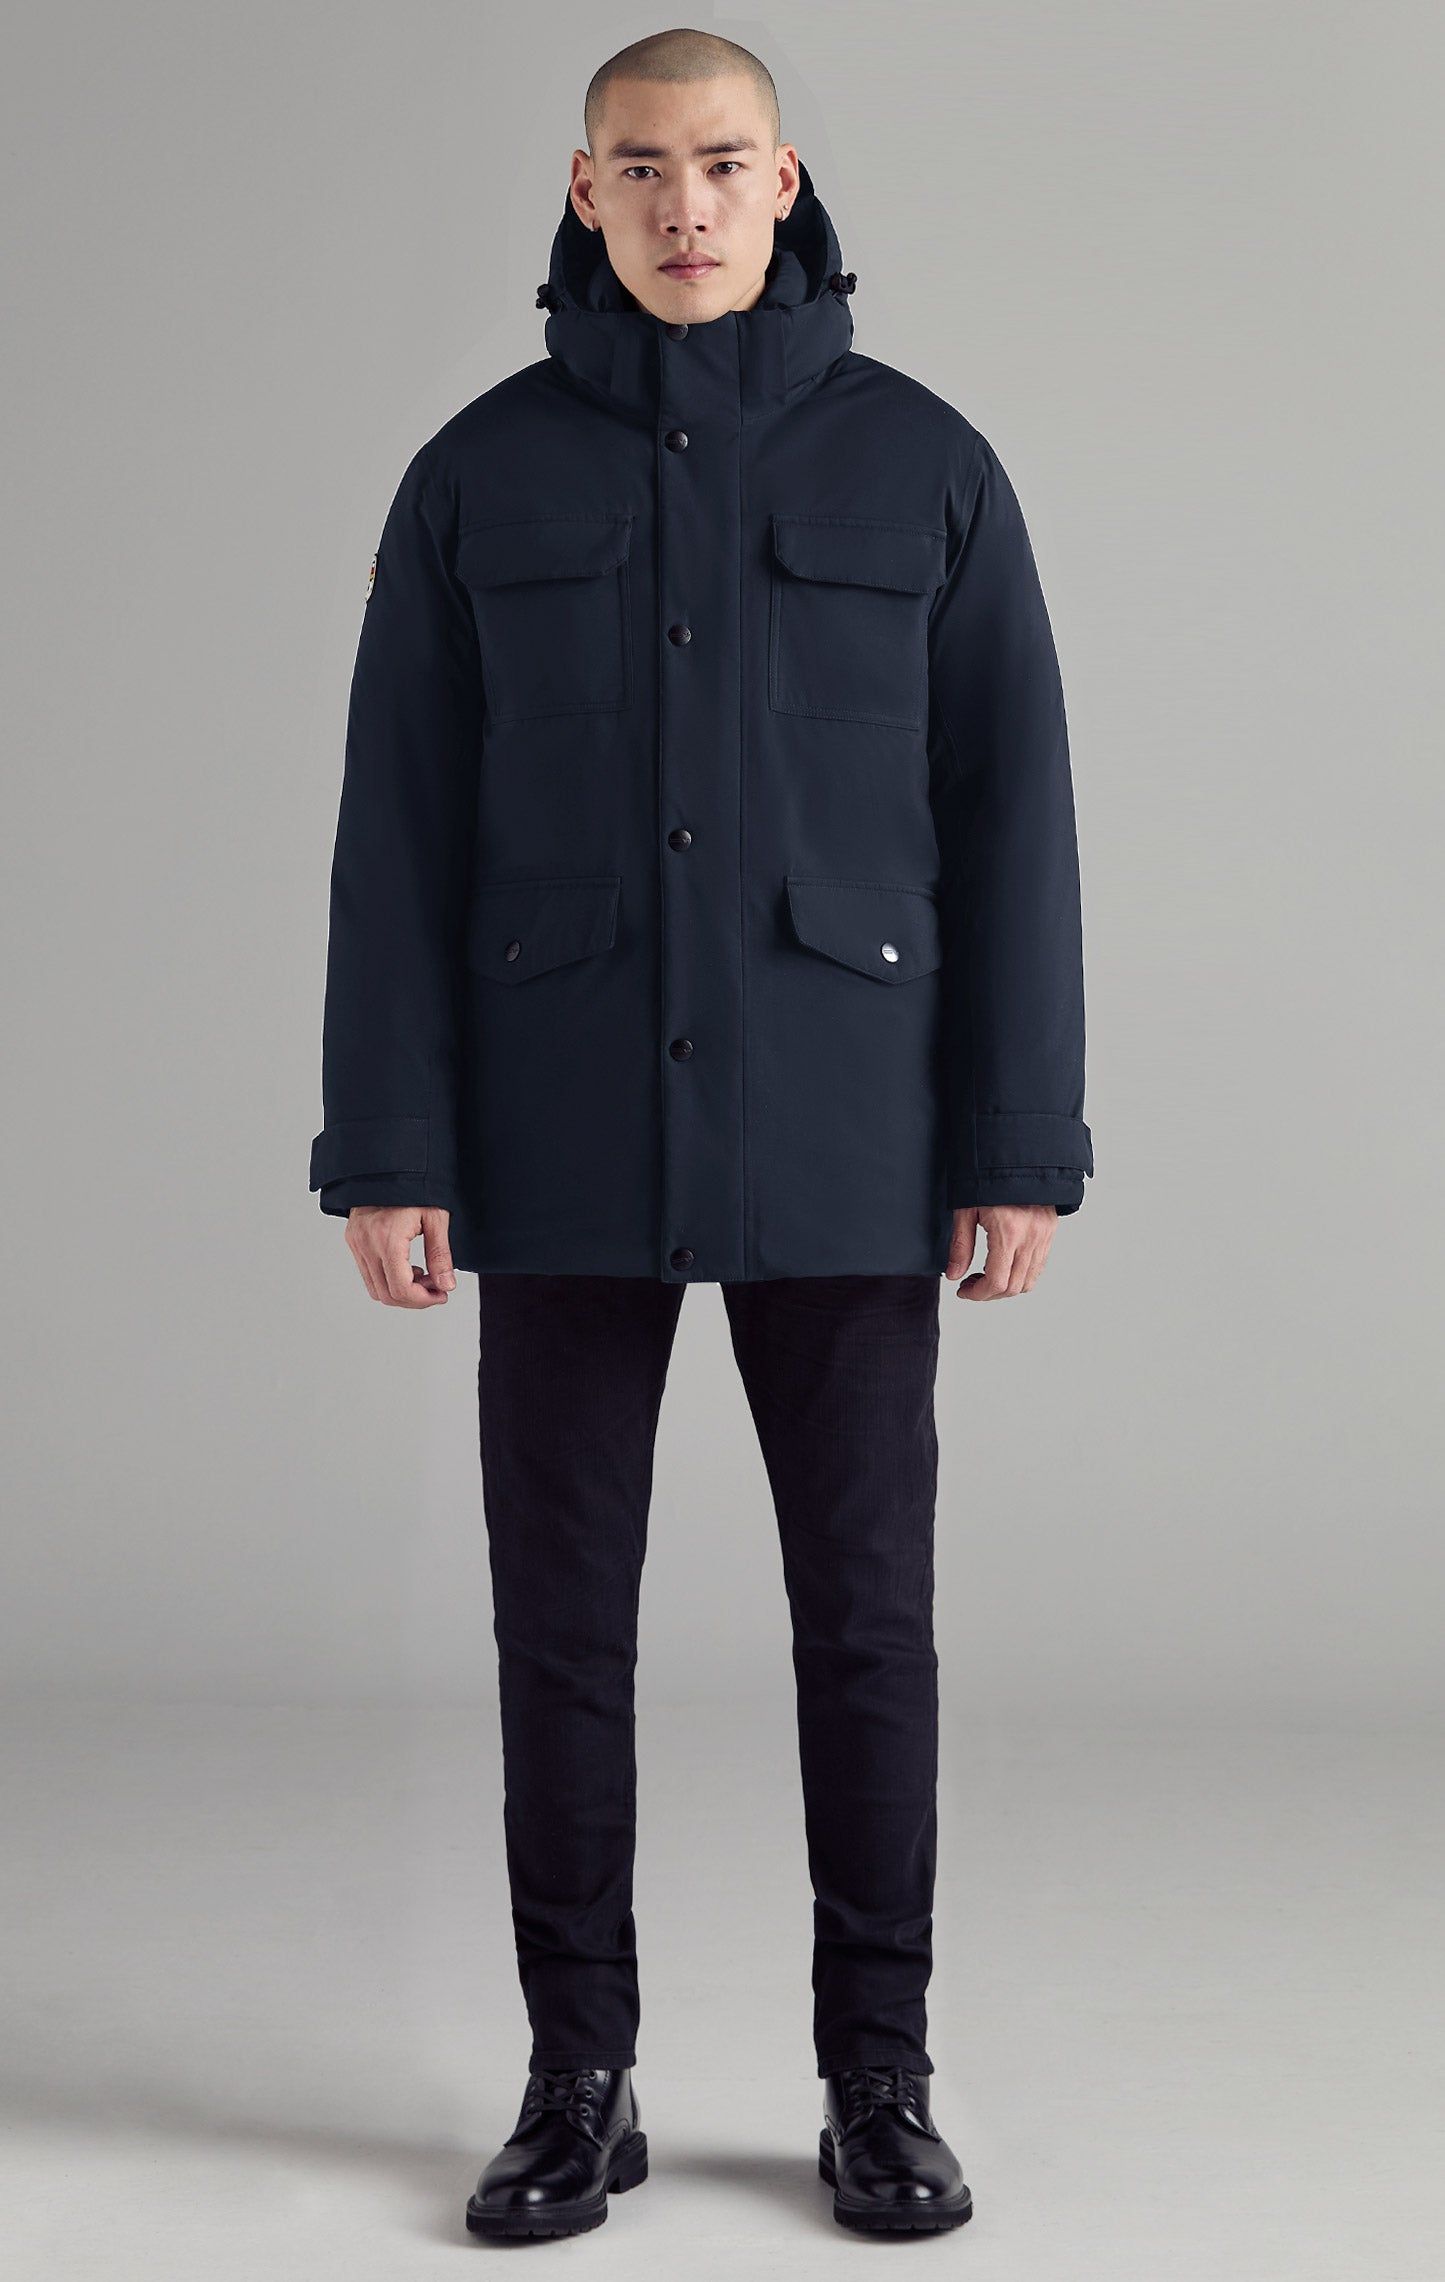 Stay Warm in Style: The Best Men’s Parkas
for Winter